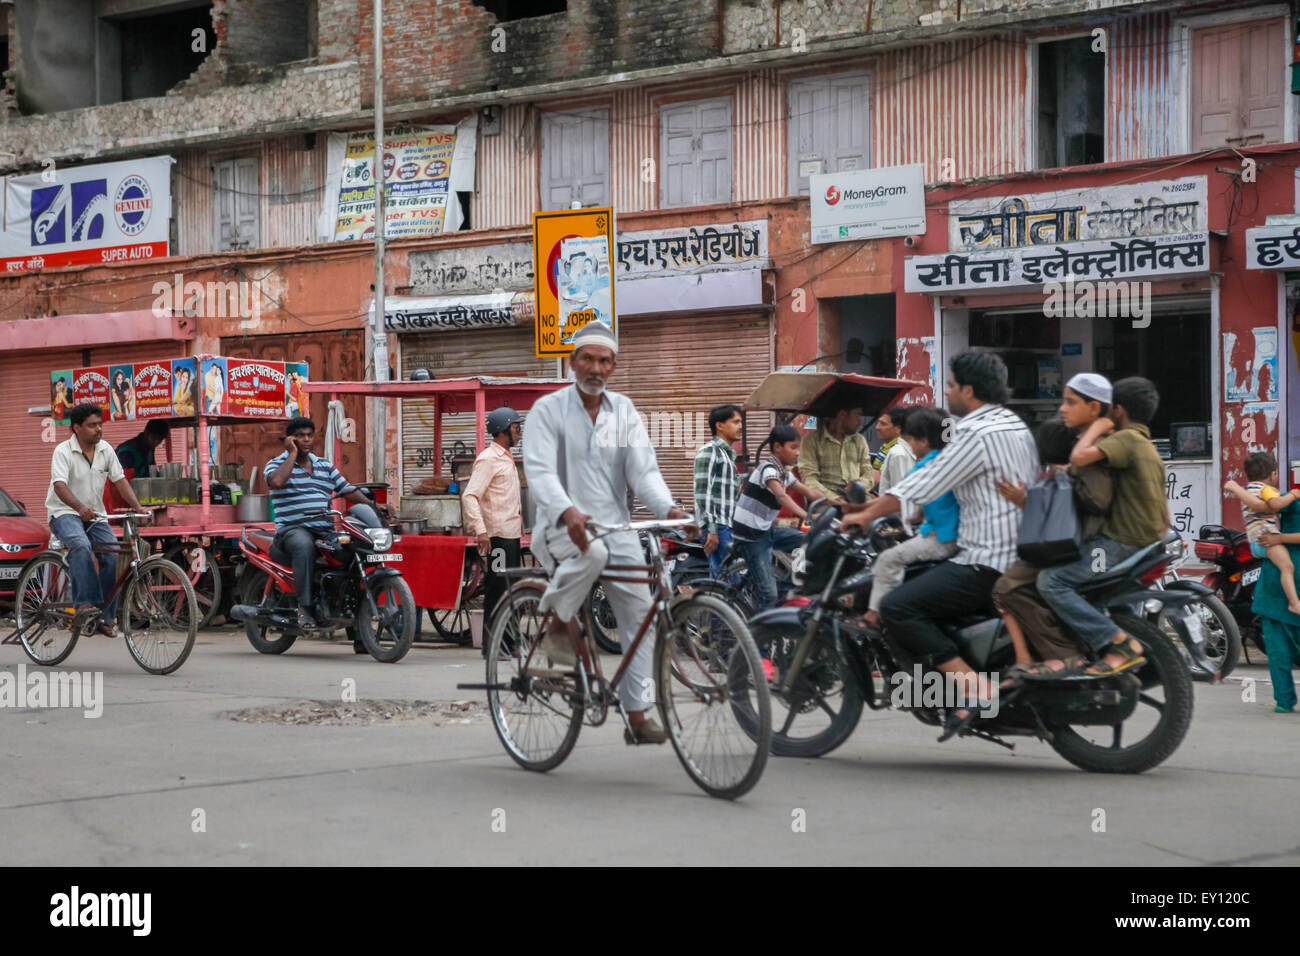 Various transportation vehicles are seen on a busy street in Jaipur, Rajasthan, India. Stock Photo